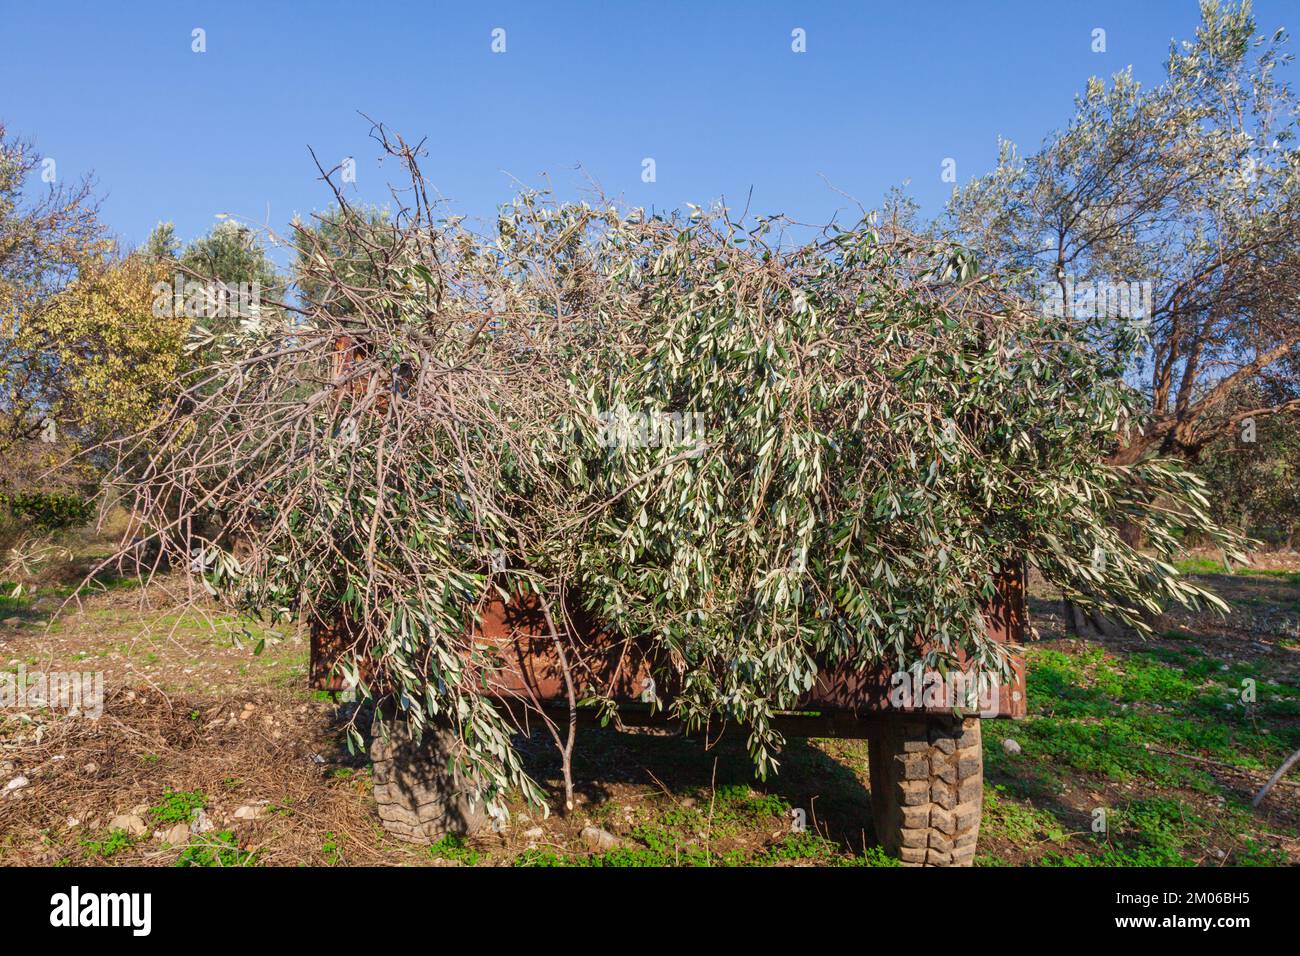 Pruned olive branches loaded on the tractor. Mediterranean nature and farm view Stock Photo